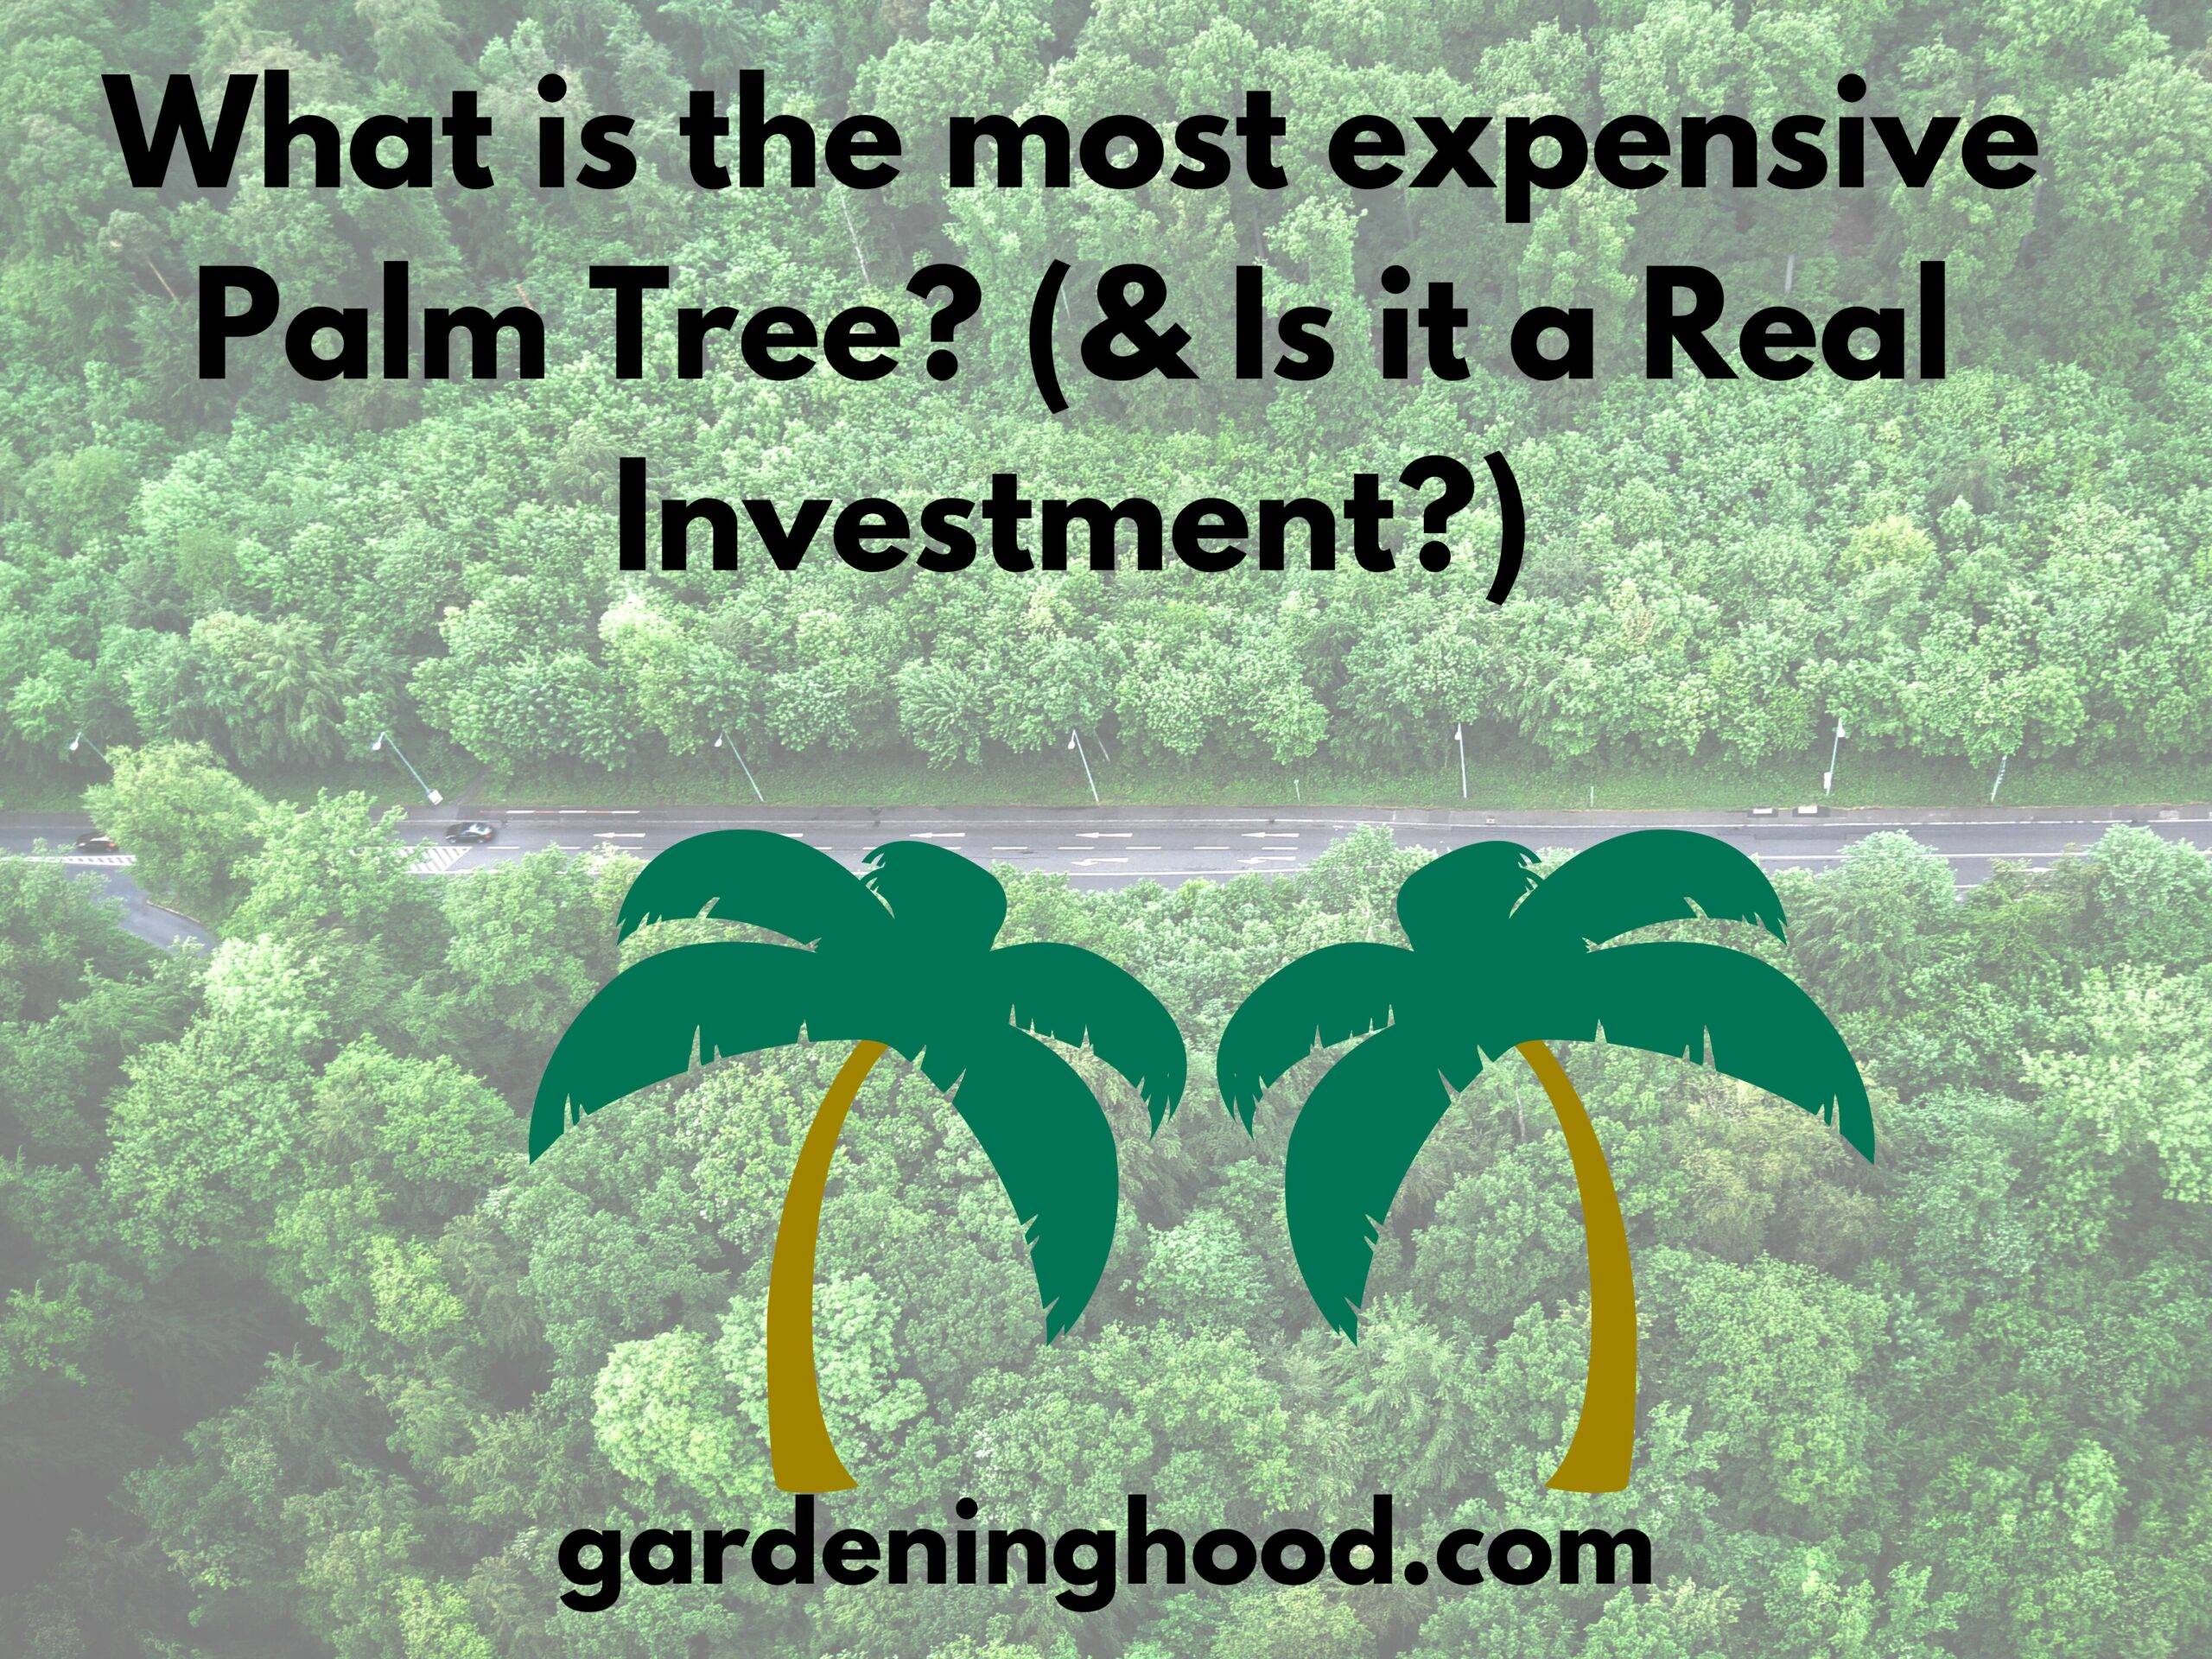 What is the most expensive Palm Tree? (& Is it a Real Investment?)